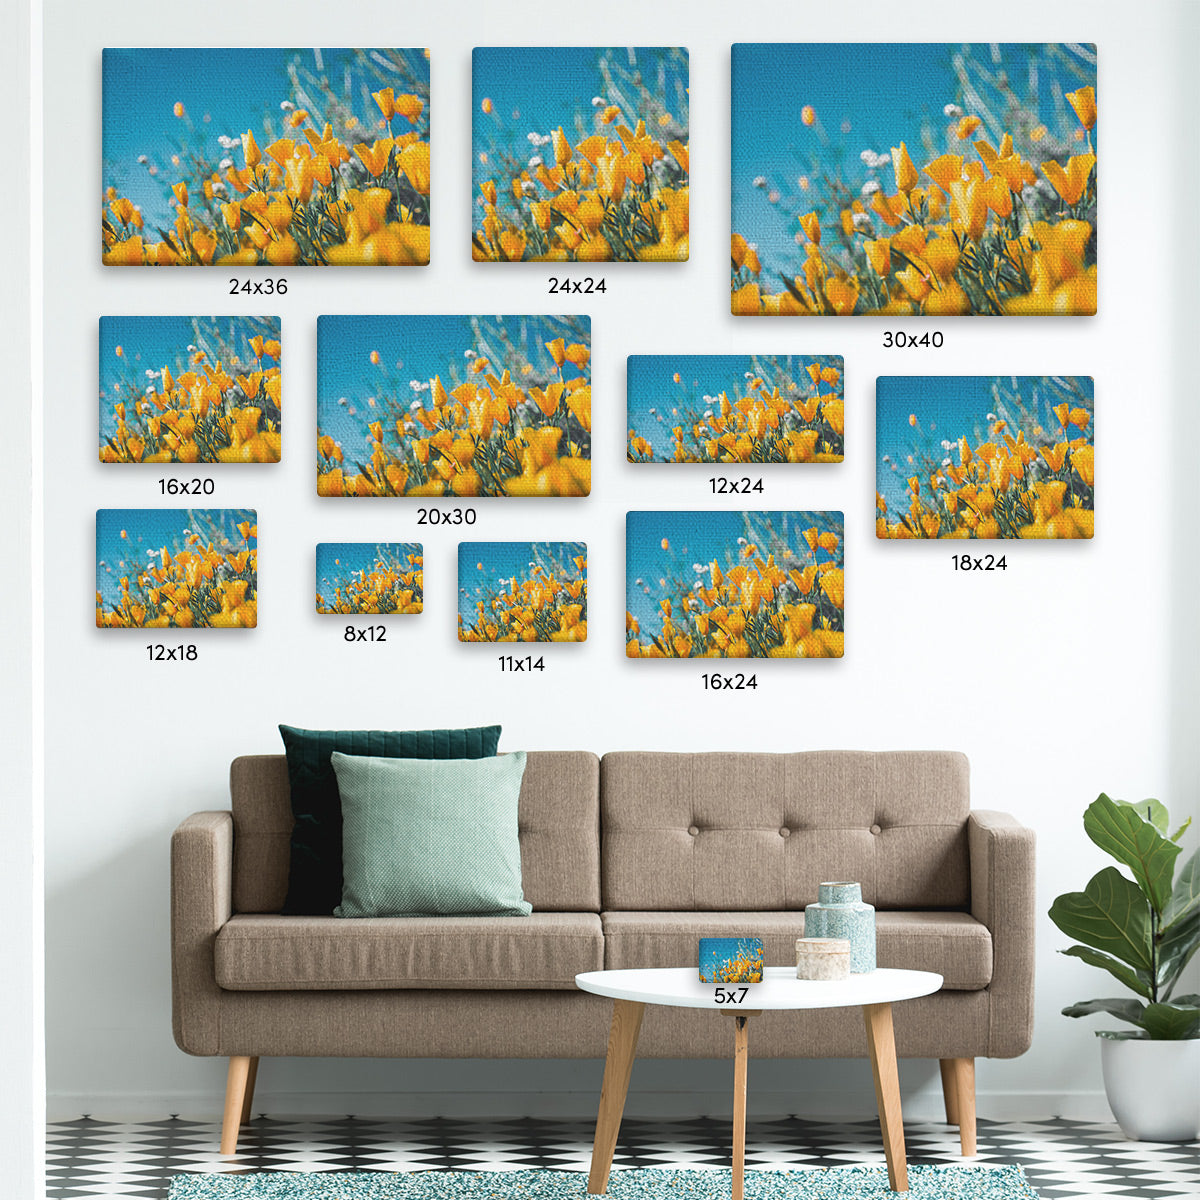 Standard Canvas Print Sizes Compared on a Wall - Posterjack Canada